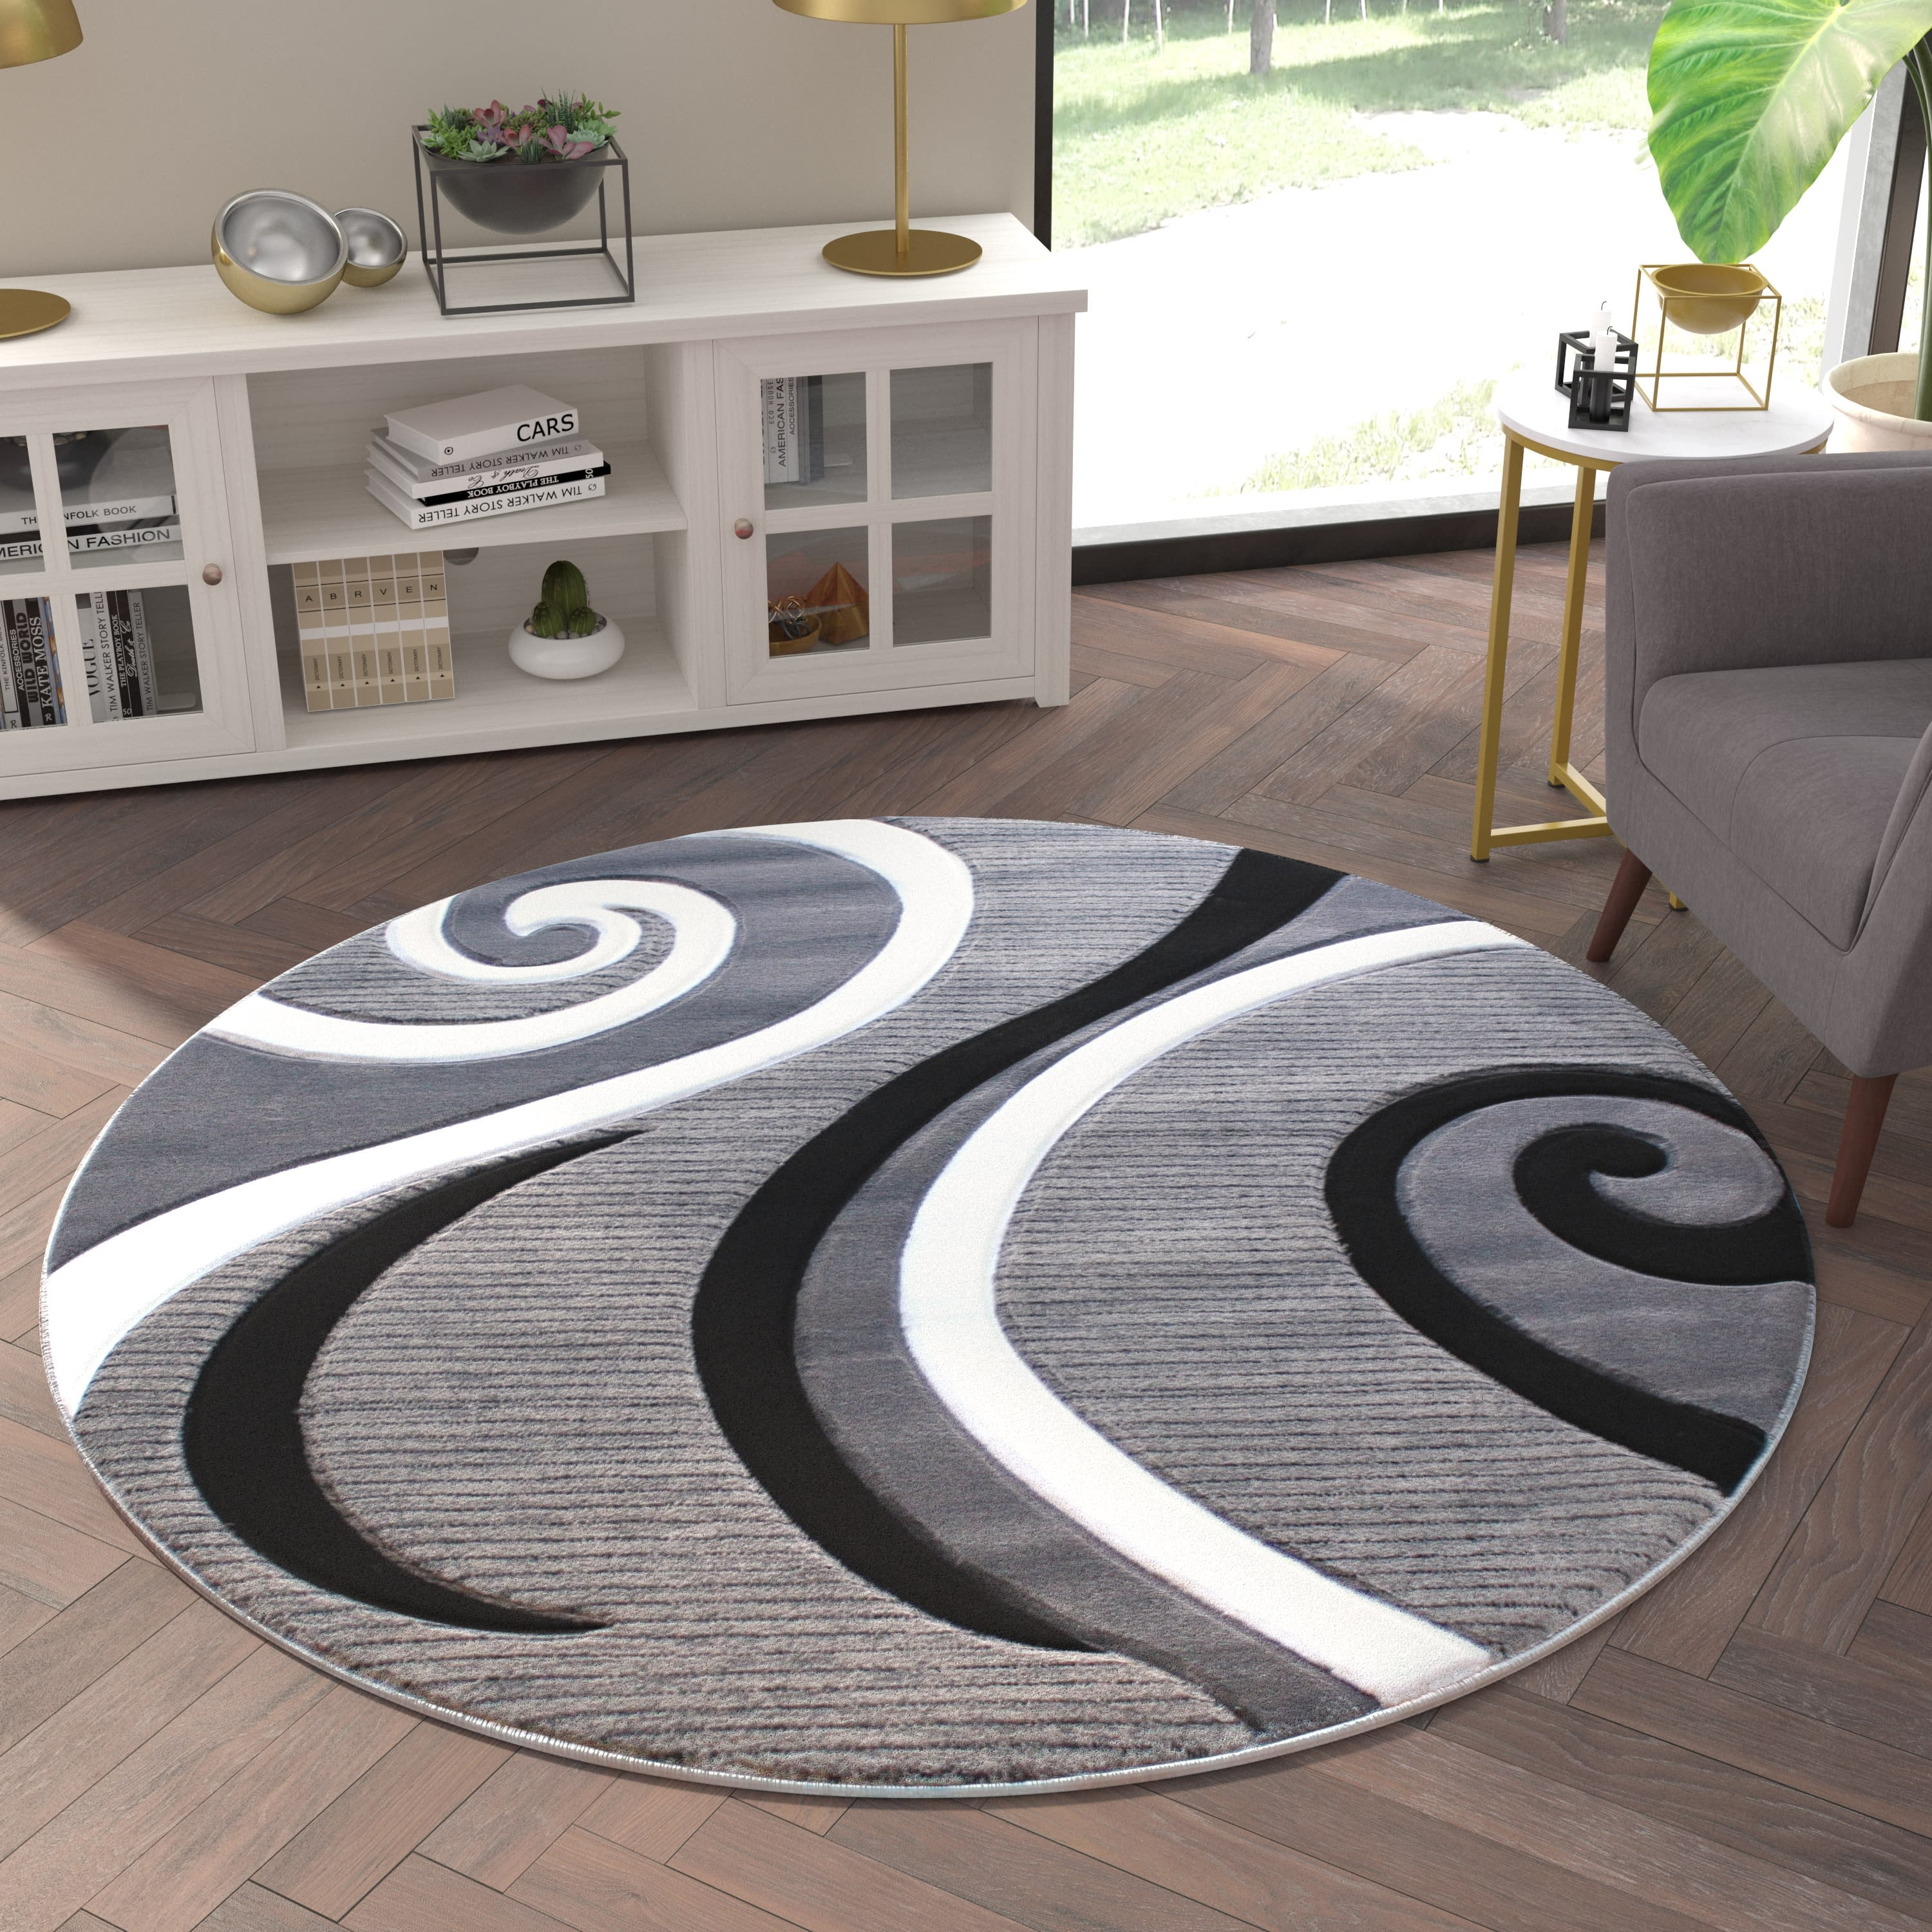 Emma + Oliver 5x5 Round Accent Rug with Modern 3D Sculpted Swirl